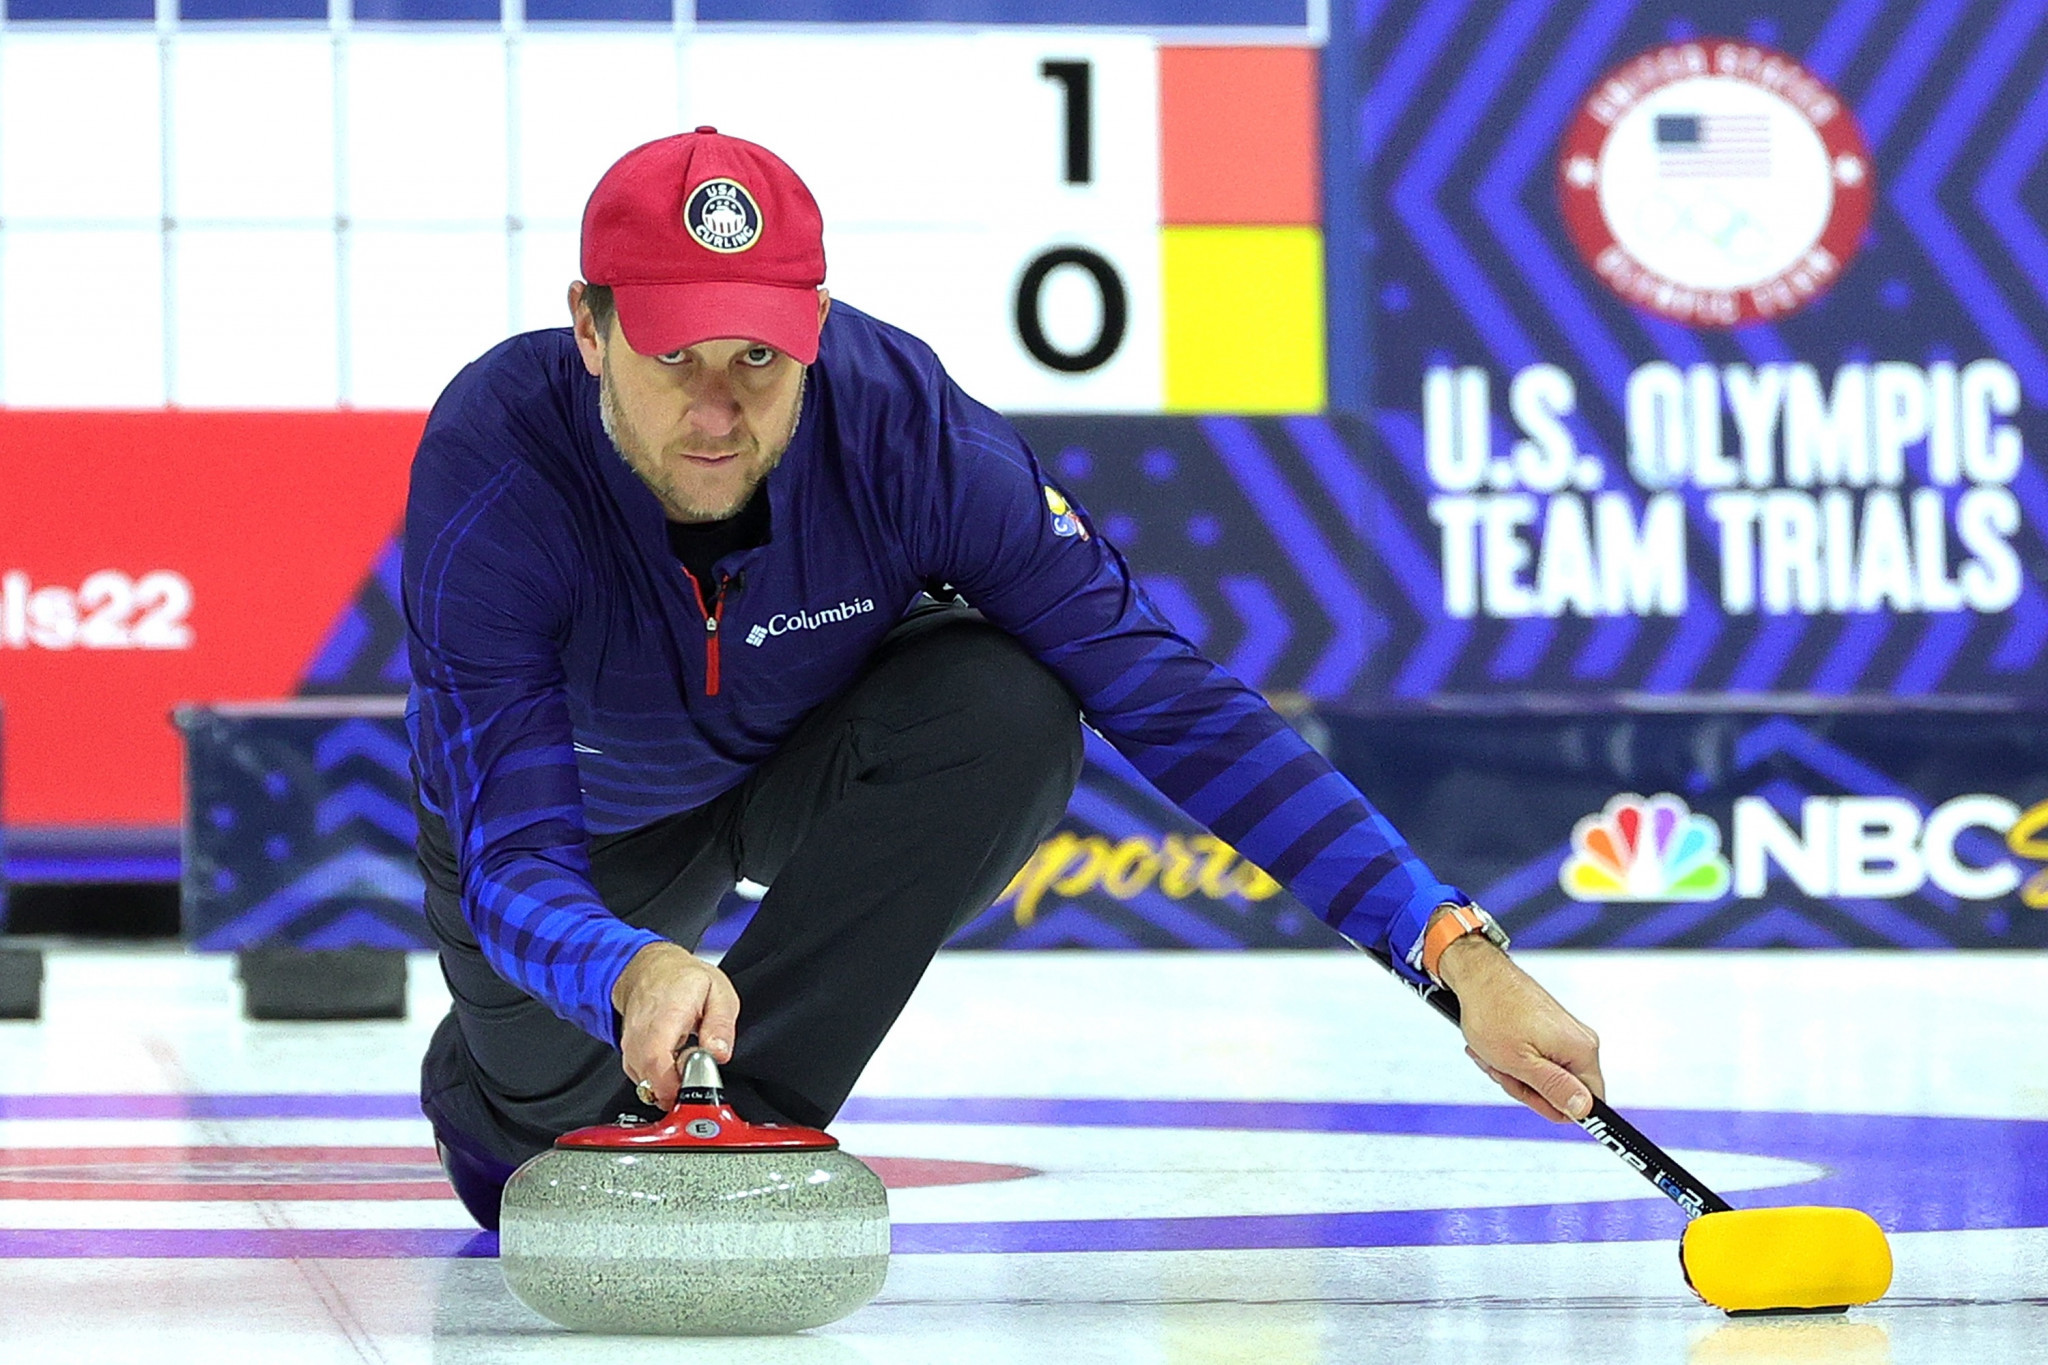 John Shuster will be looking to lead the US to another curling gold at the Winter Olympics ©Getty Images